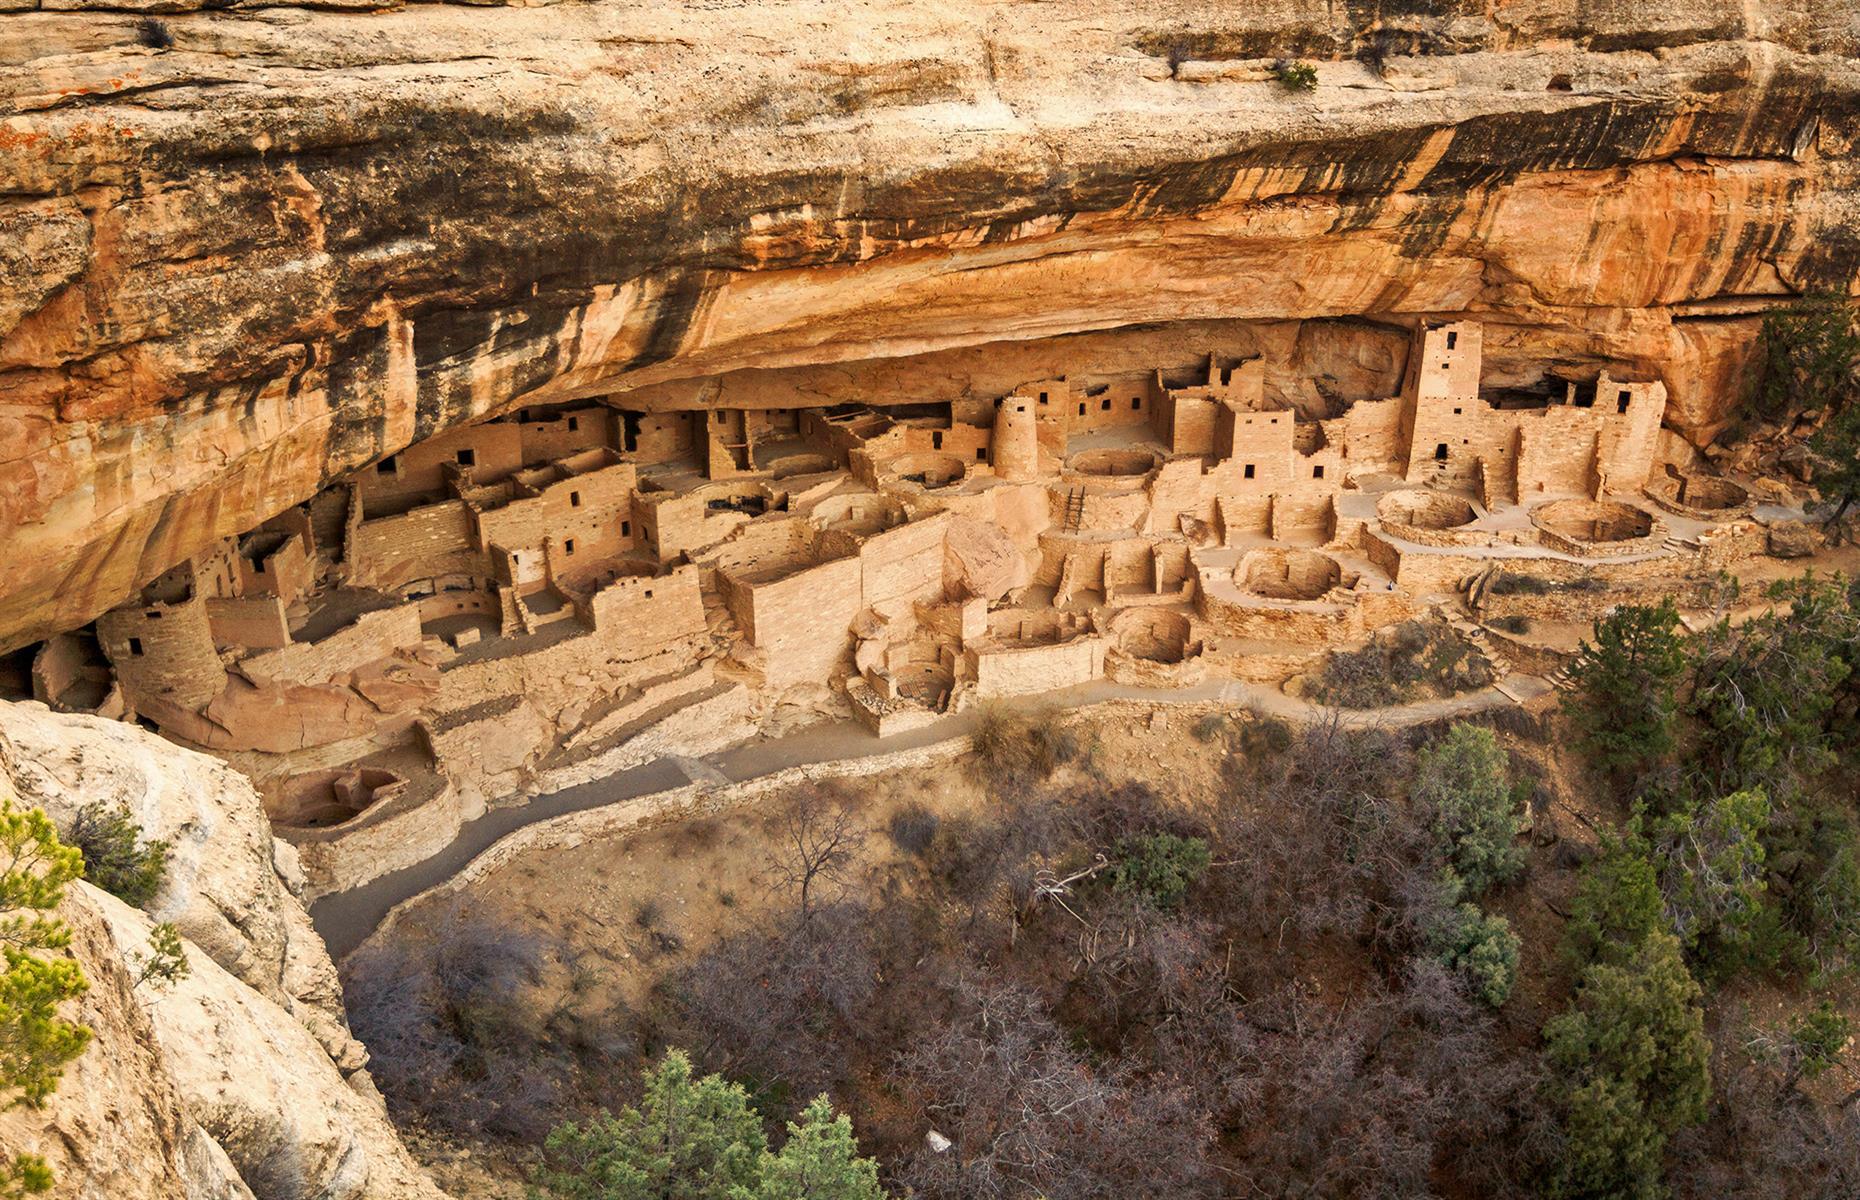 <p>Possibly dating back to <a href="https://whc.unesco.org/en/list/27/">around AD 450</a>, these dwellings housed Ancestral Puebloans who lived in this region for more than 700 years. In total, there are 5,000 or so archaeological sites to explore within the <a href="https://www.nps.gov/meve/index.htm">national park</a>. If you visit, make sure you see the incredible homes carved into and built around the rocky, sandstone landscape.</p>  <p><a href="https://www.loveexploring.com/galleries/123234/american-beauties-the-best-national-park-in-every-state?page=1"><strong>This is the best national park in every state</strong></a></p>